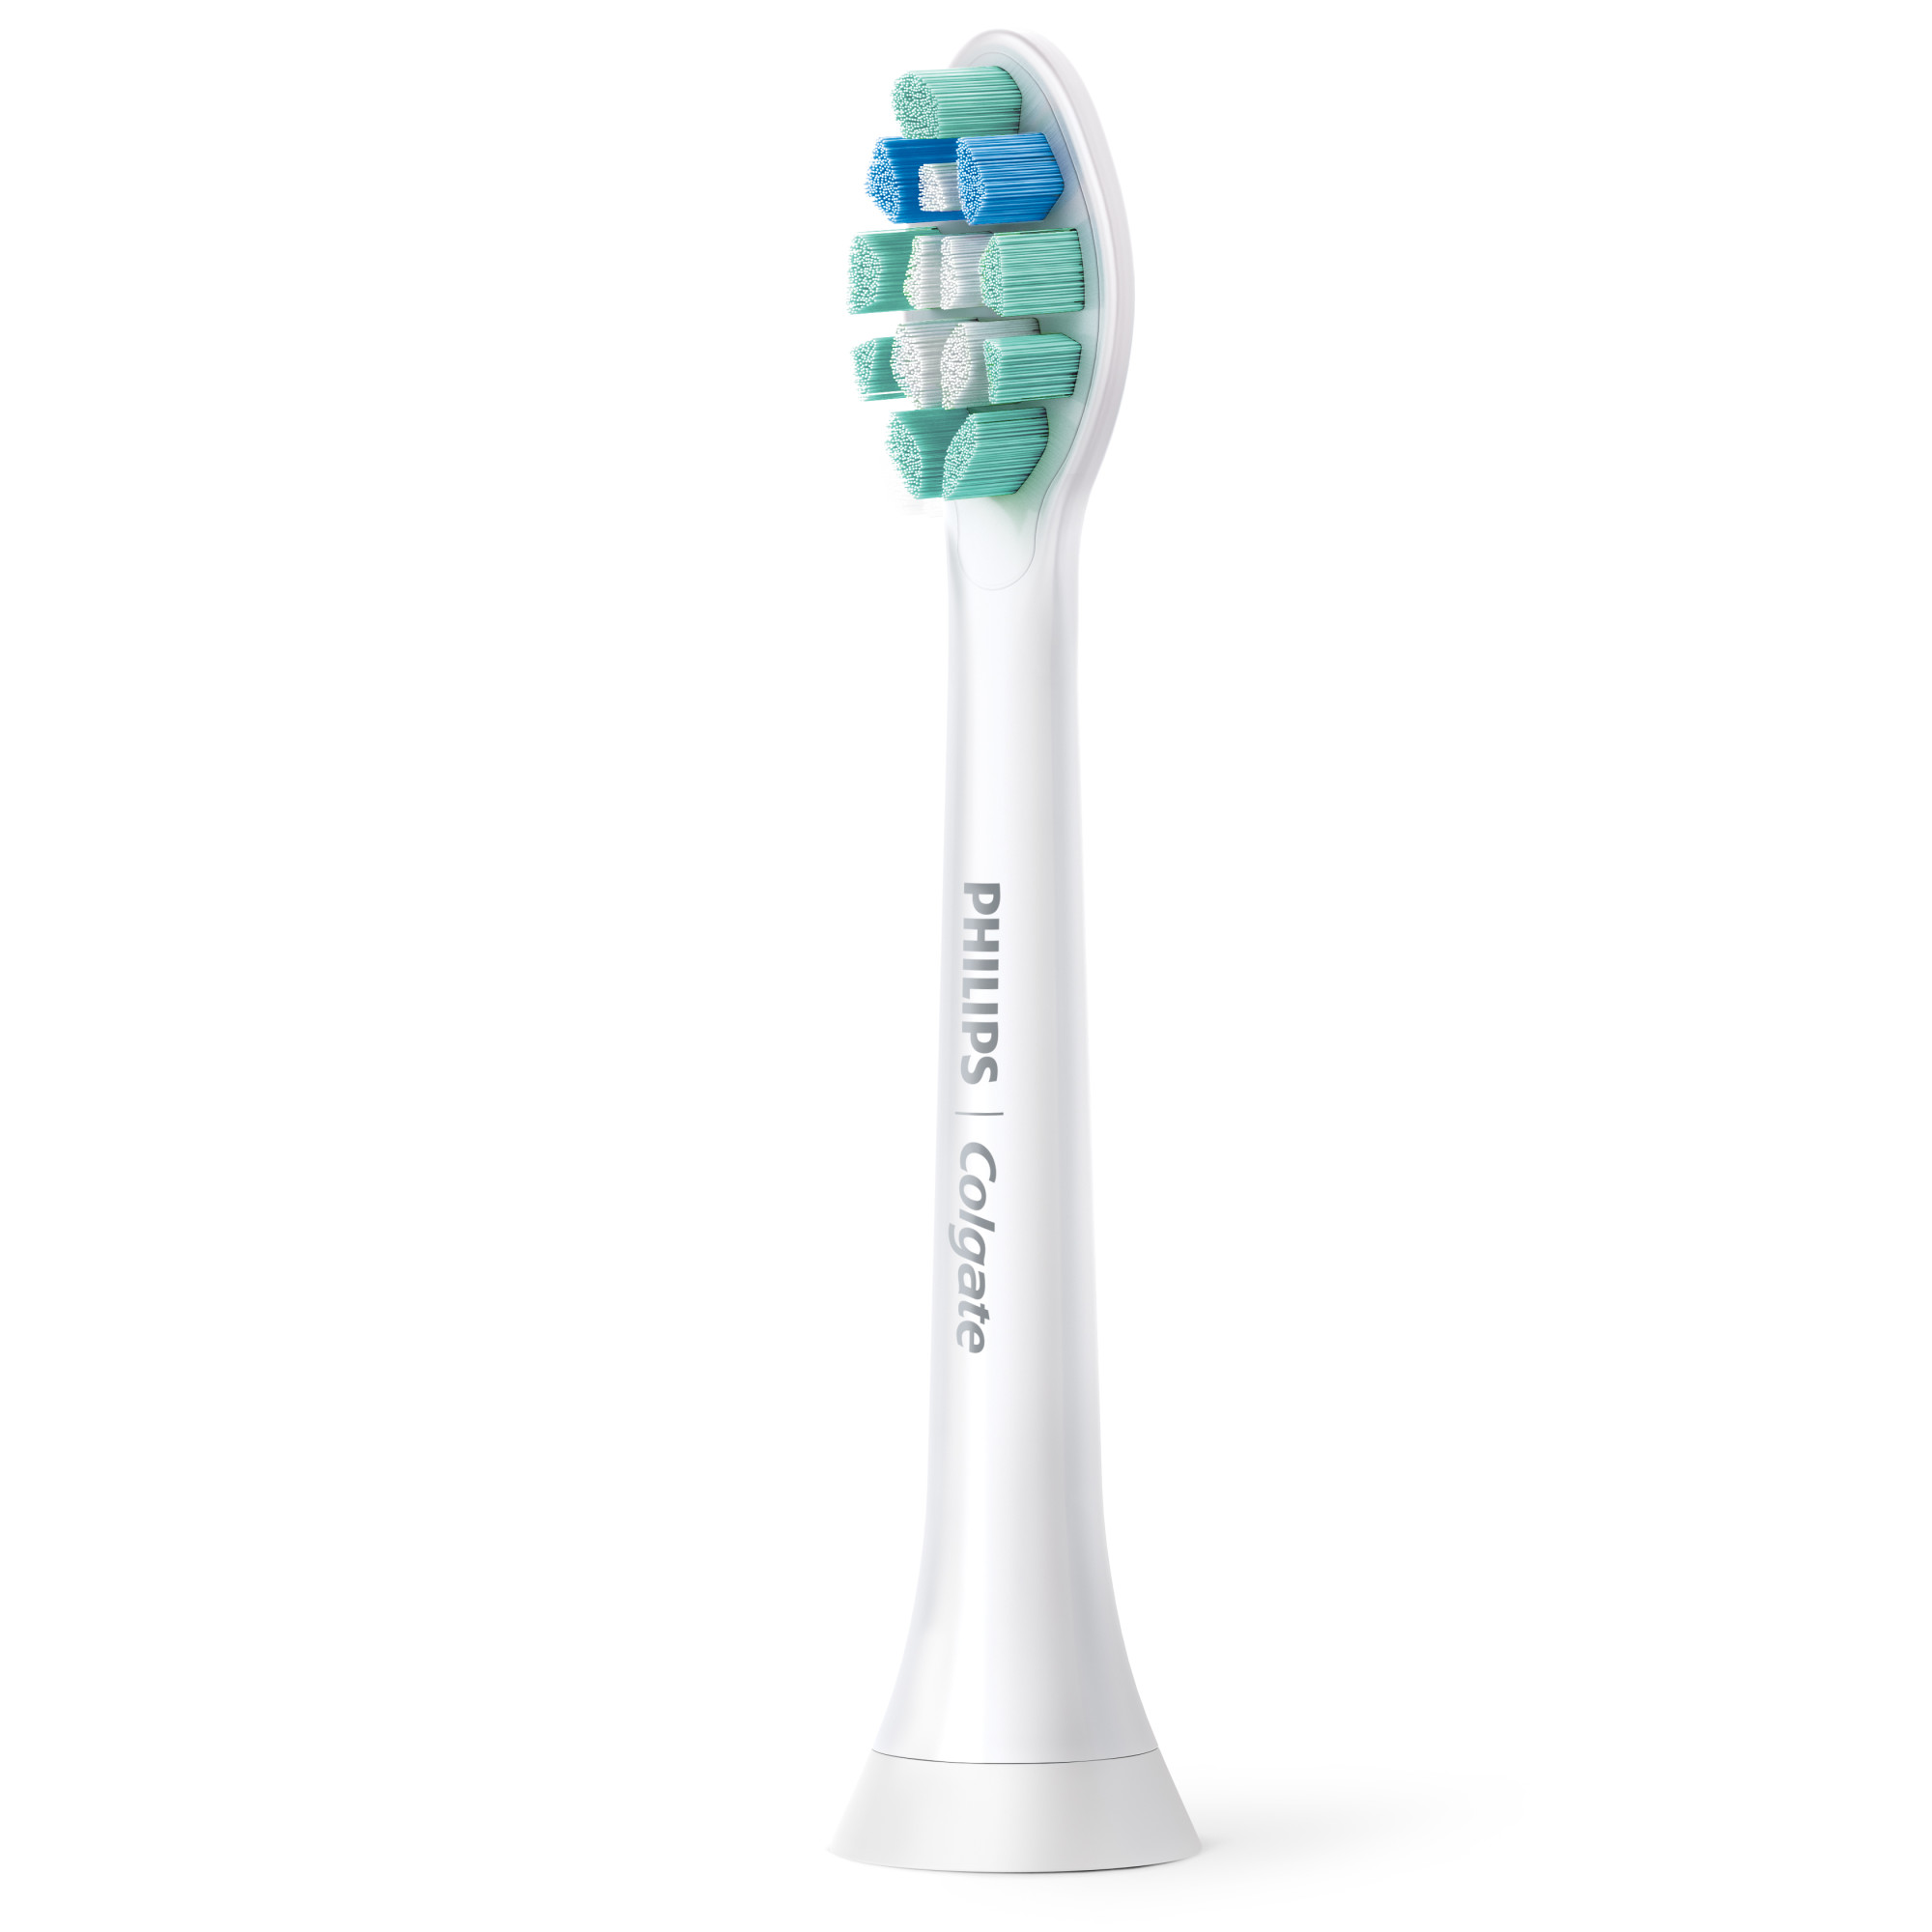 Philips Sonicare ProtectiveClean 4100 Plaque Control, Rechargeable Electric Toothbrush with Pressure Sensor, White Mint HX6817/01 - image 11 of 14